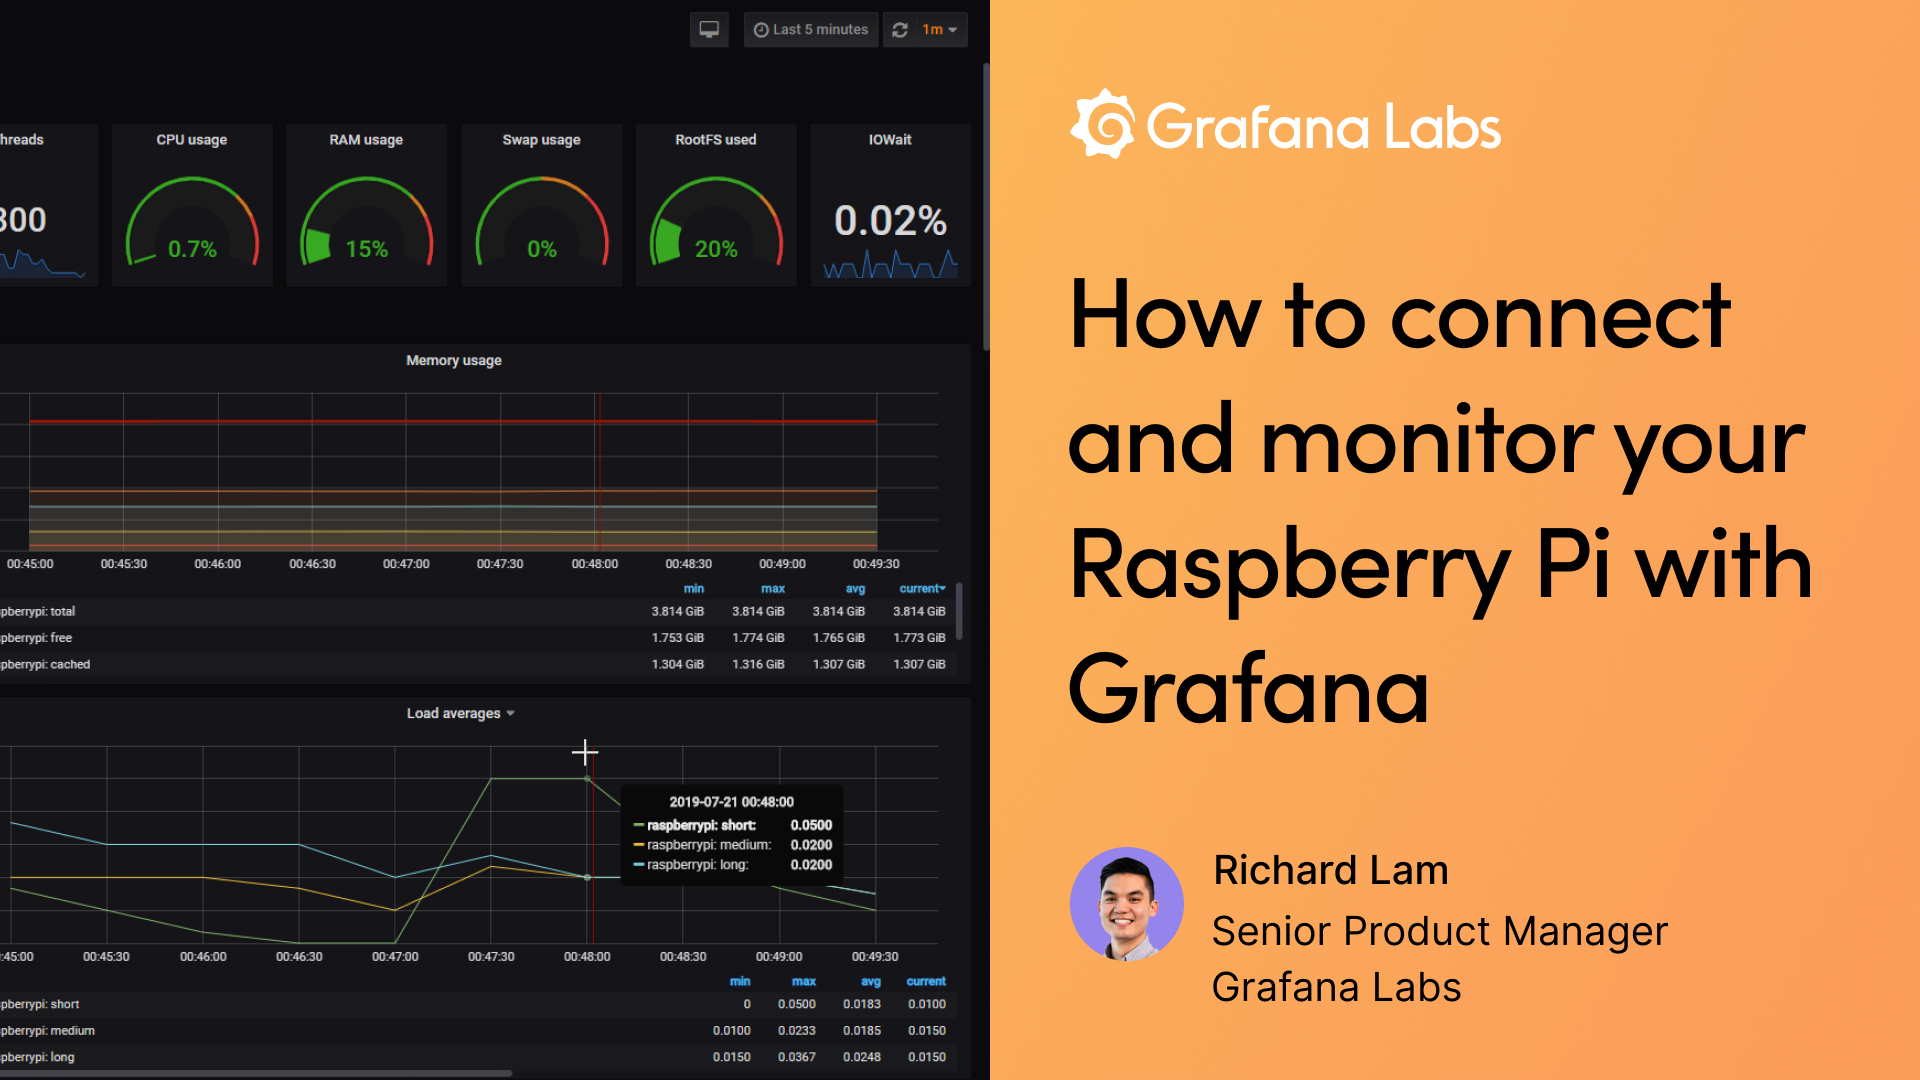 How to connect and monitor your Raspberry Pi with Grafana